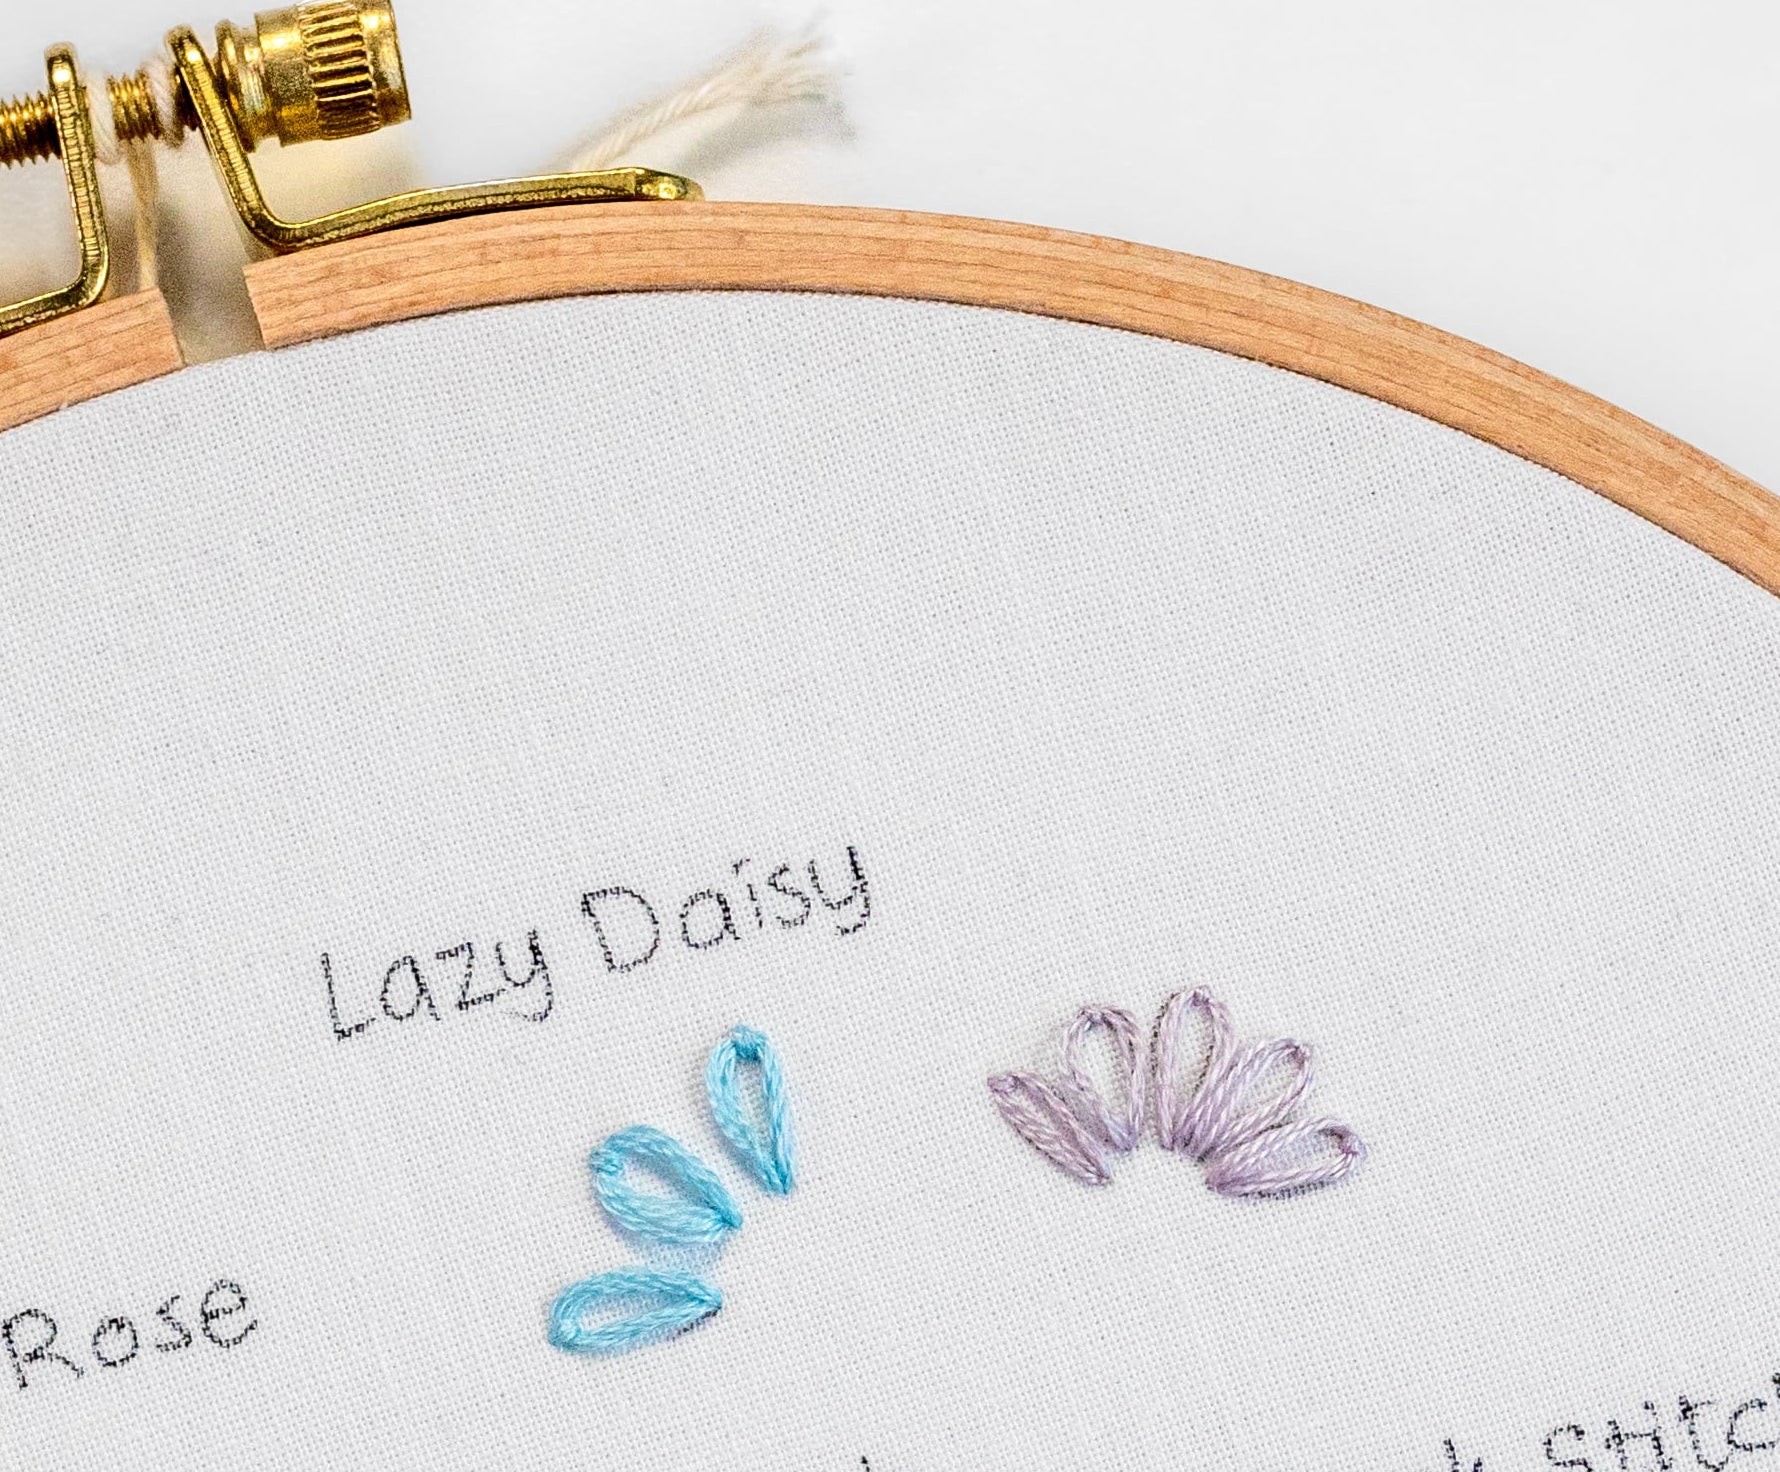 Lazy Daisy stitches are put on an embroidery sampler